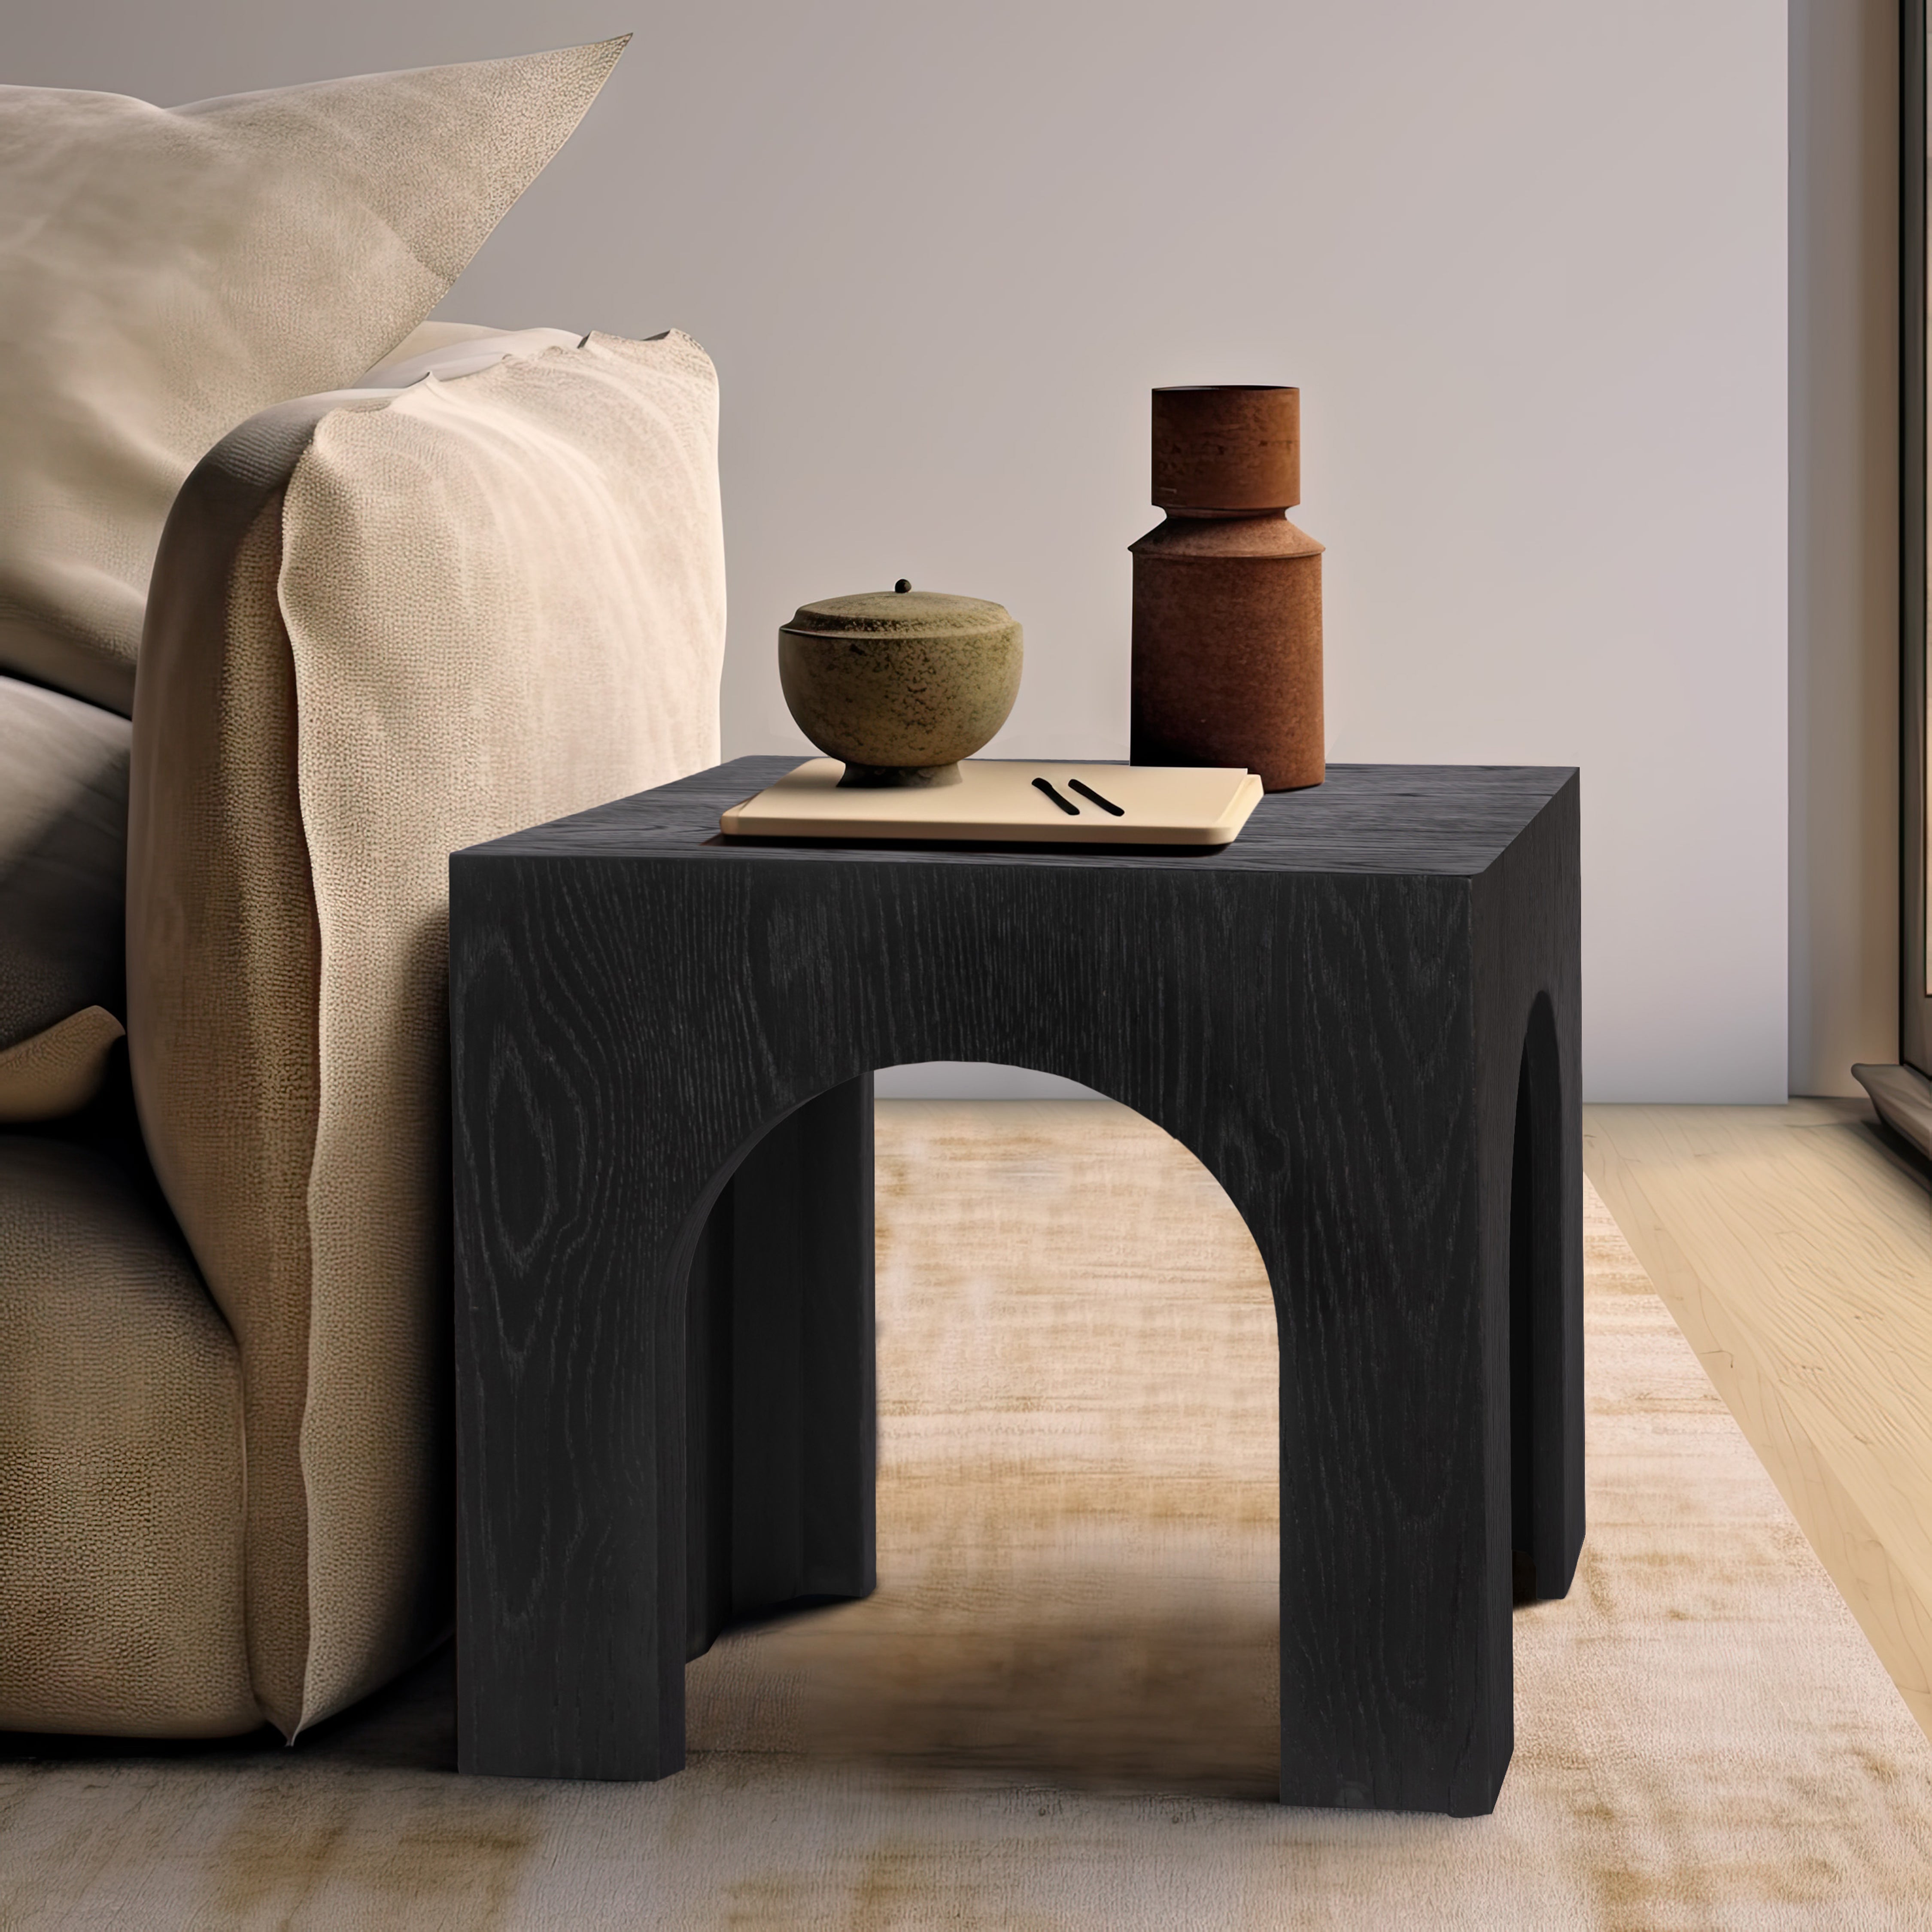 Arch End Table